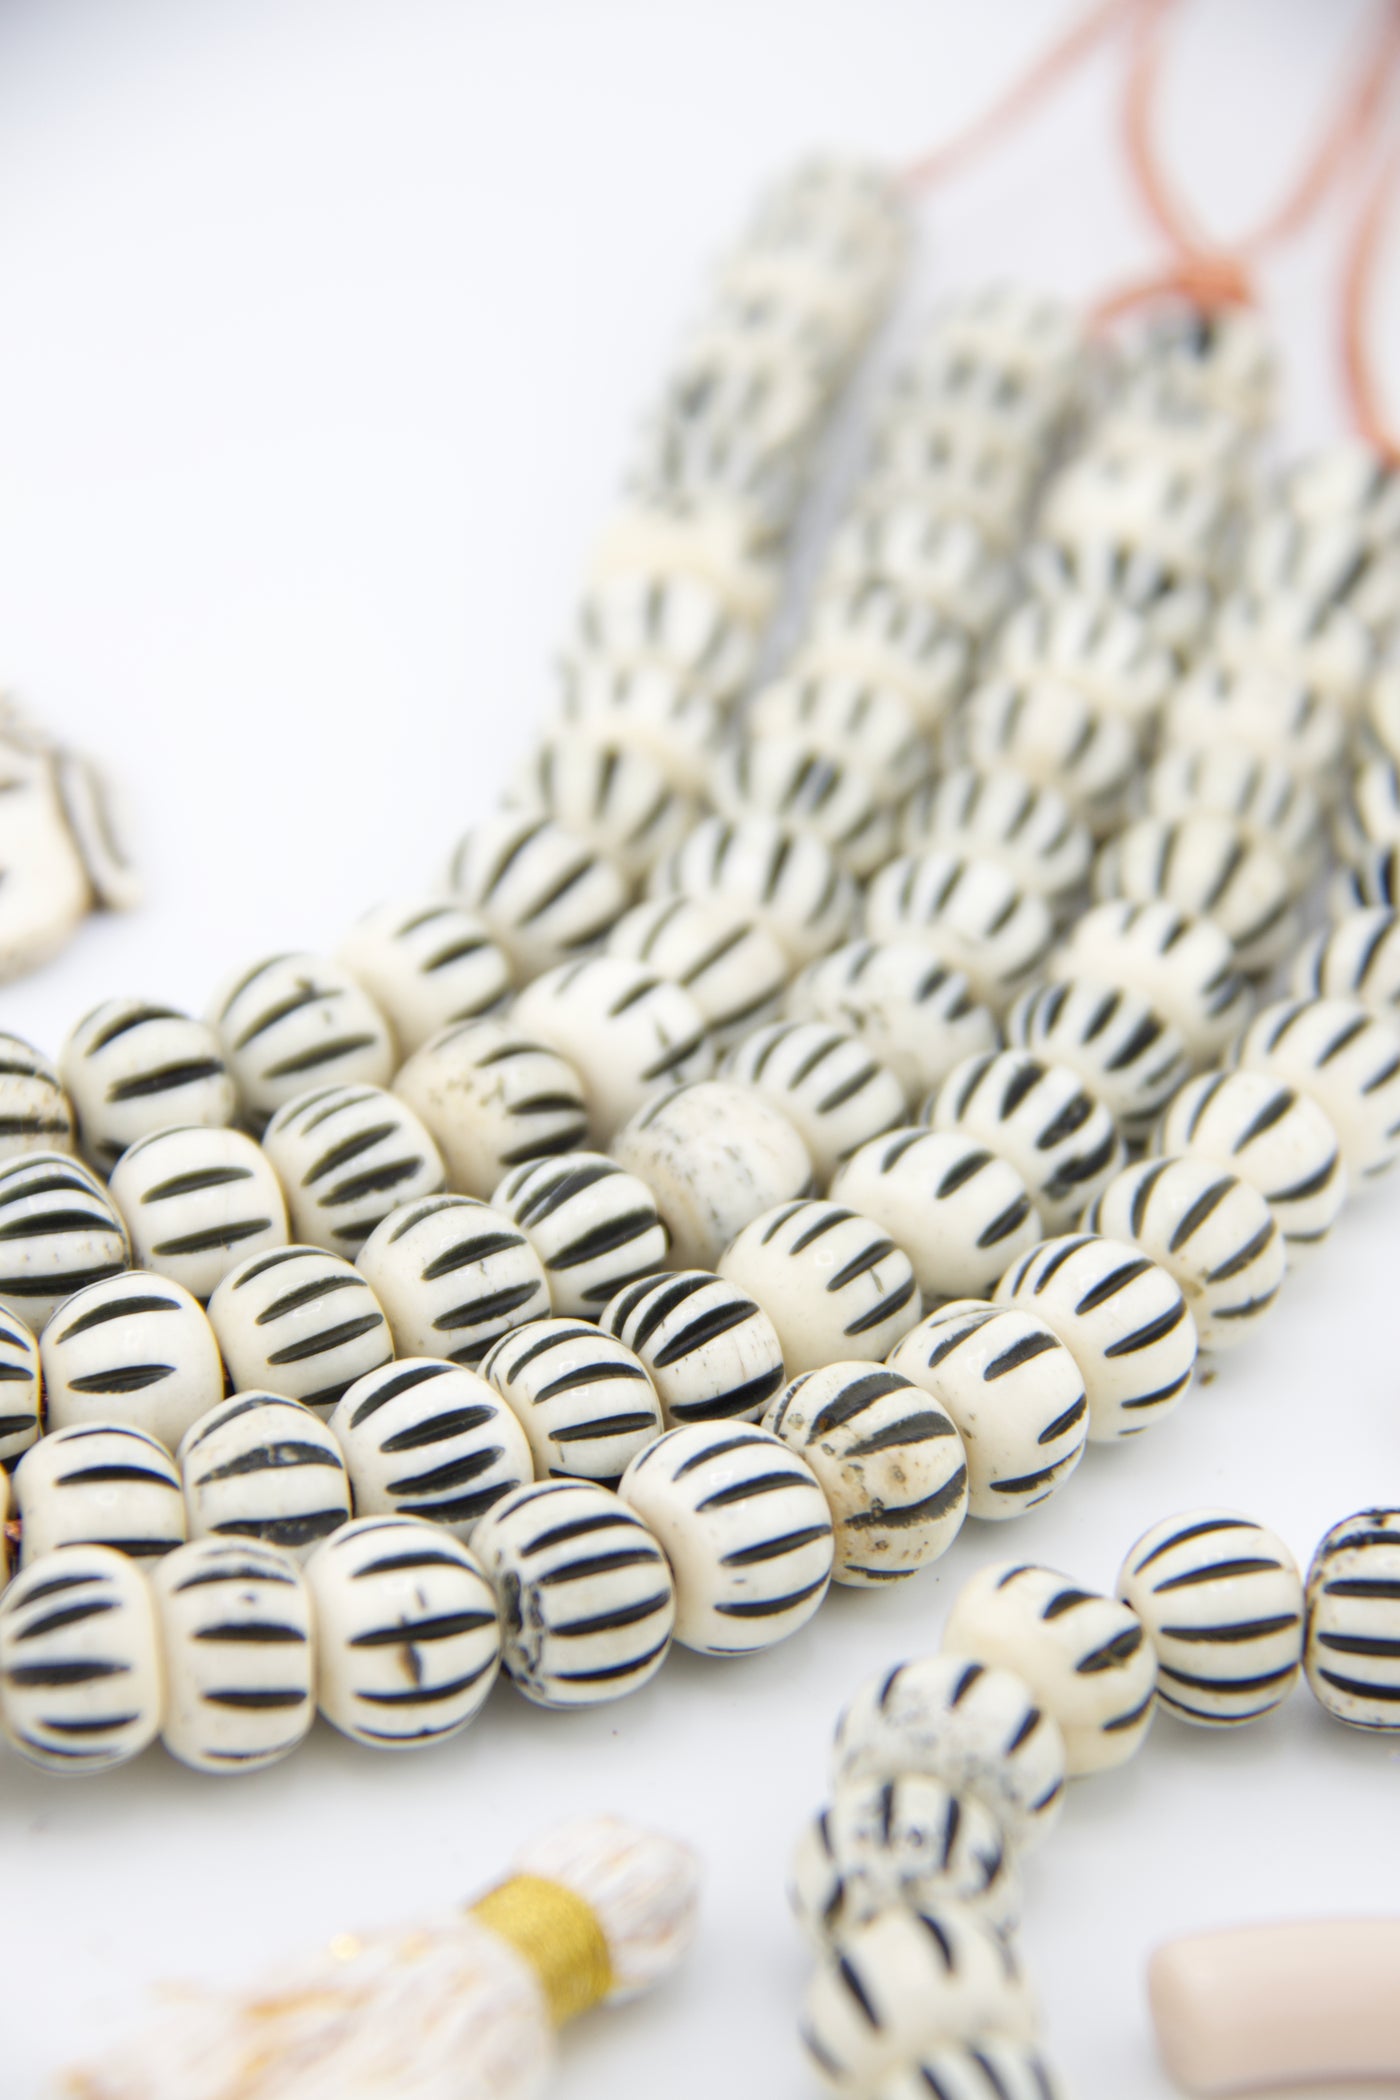 Cream & Black Striped Hand Carved Melon Bone Beads, 12mm for DIY tribal beaded jewelry